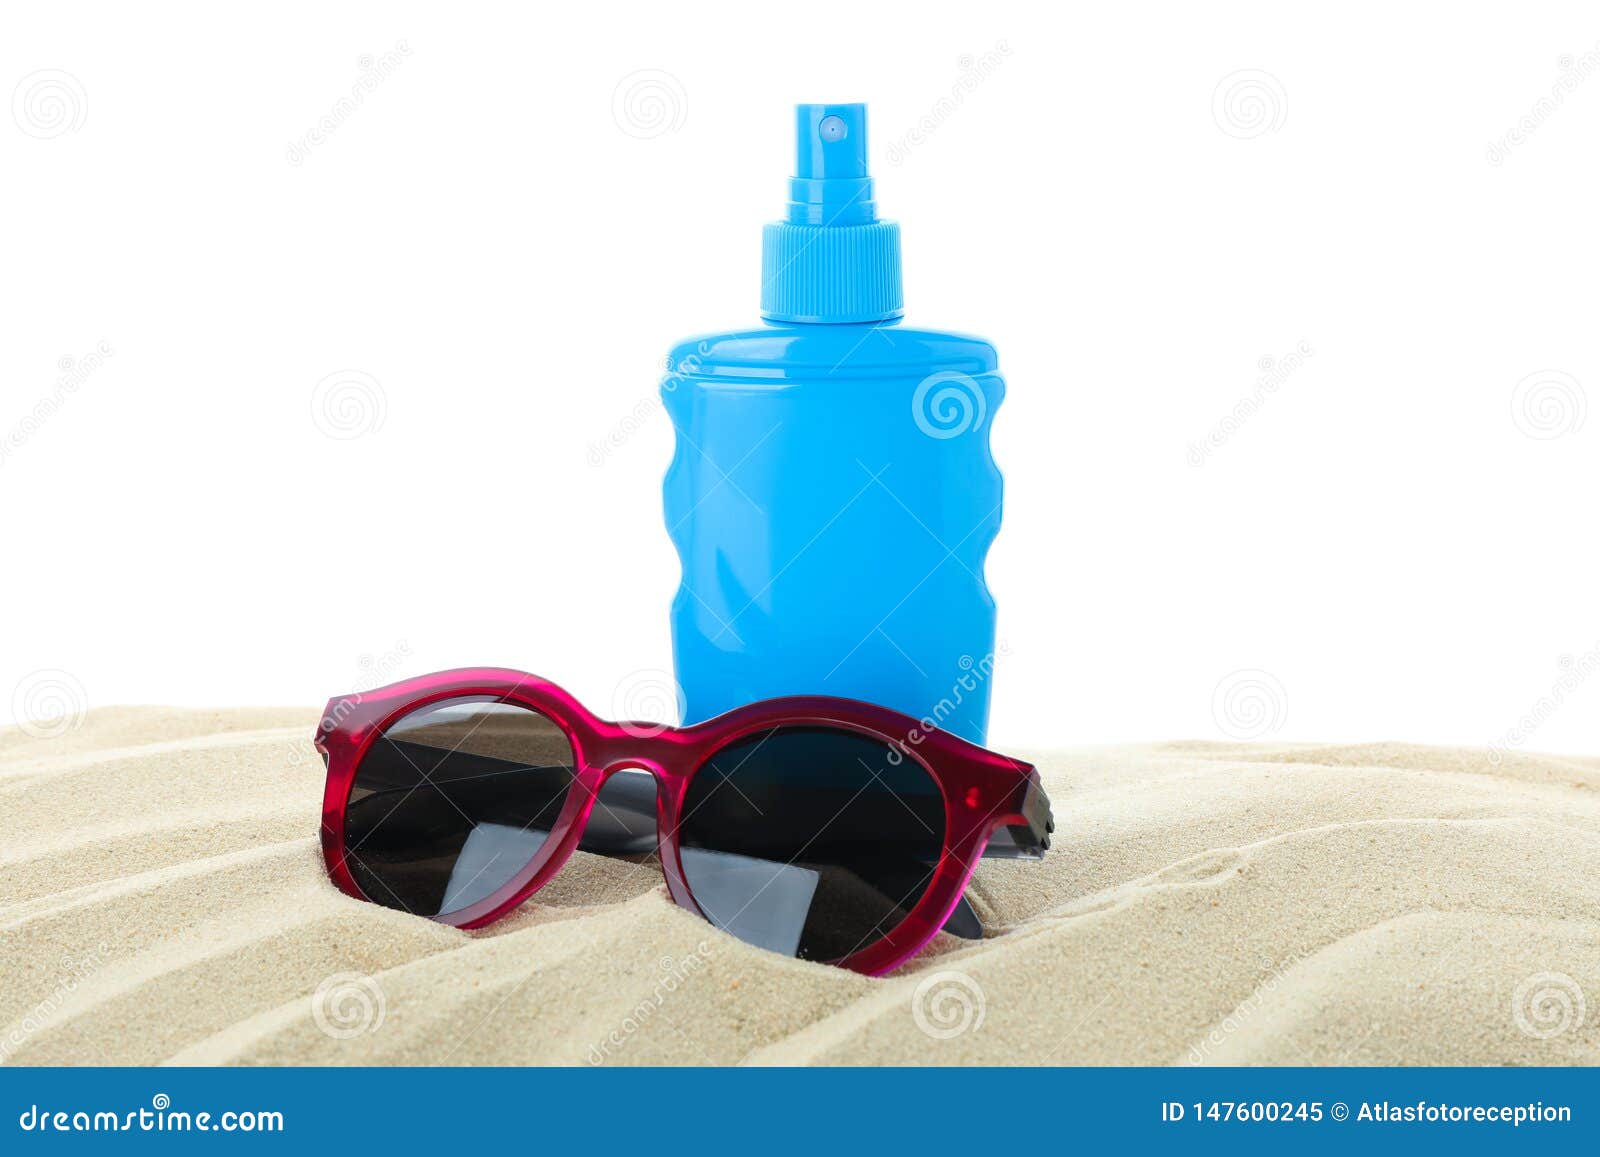 Sunscreen with Sunglasses on Clear Sea Sand Isolated on White ...